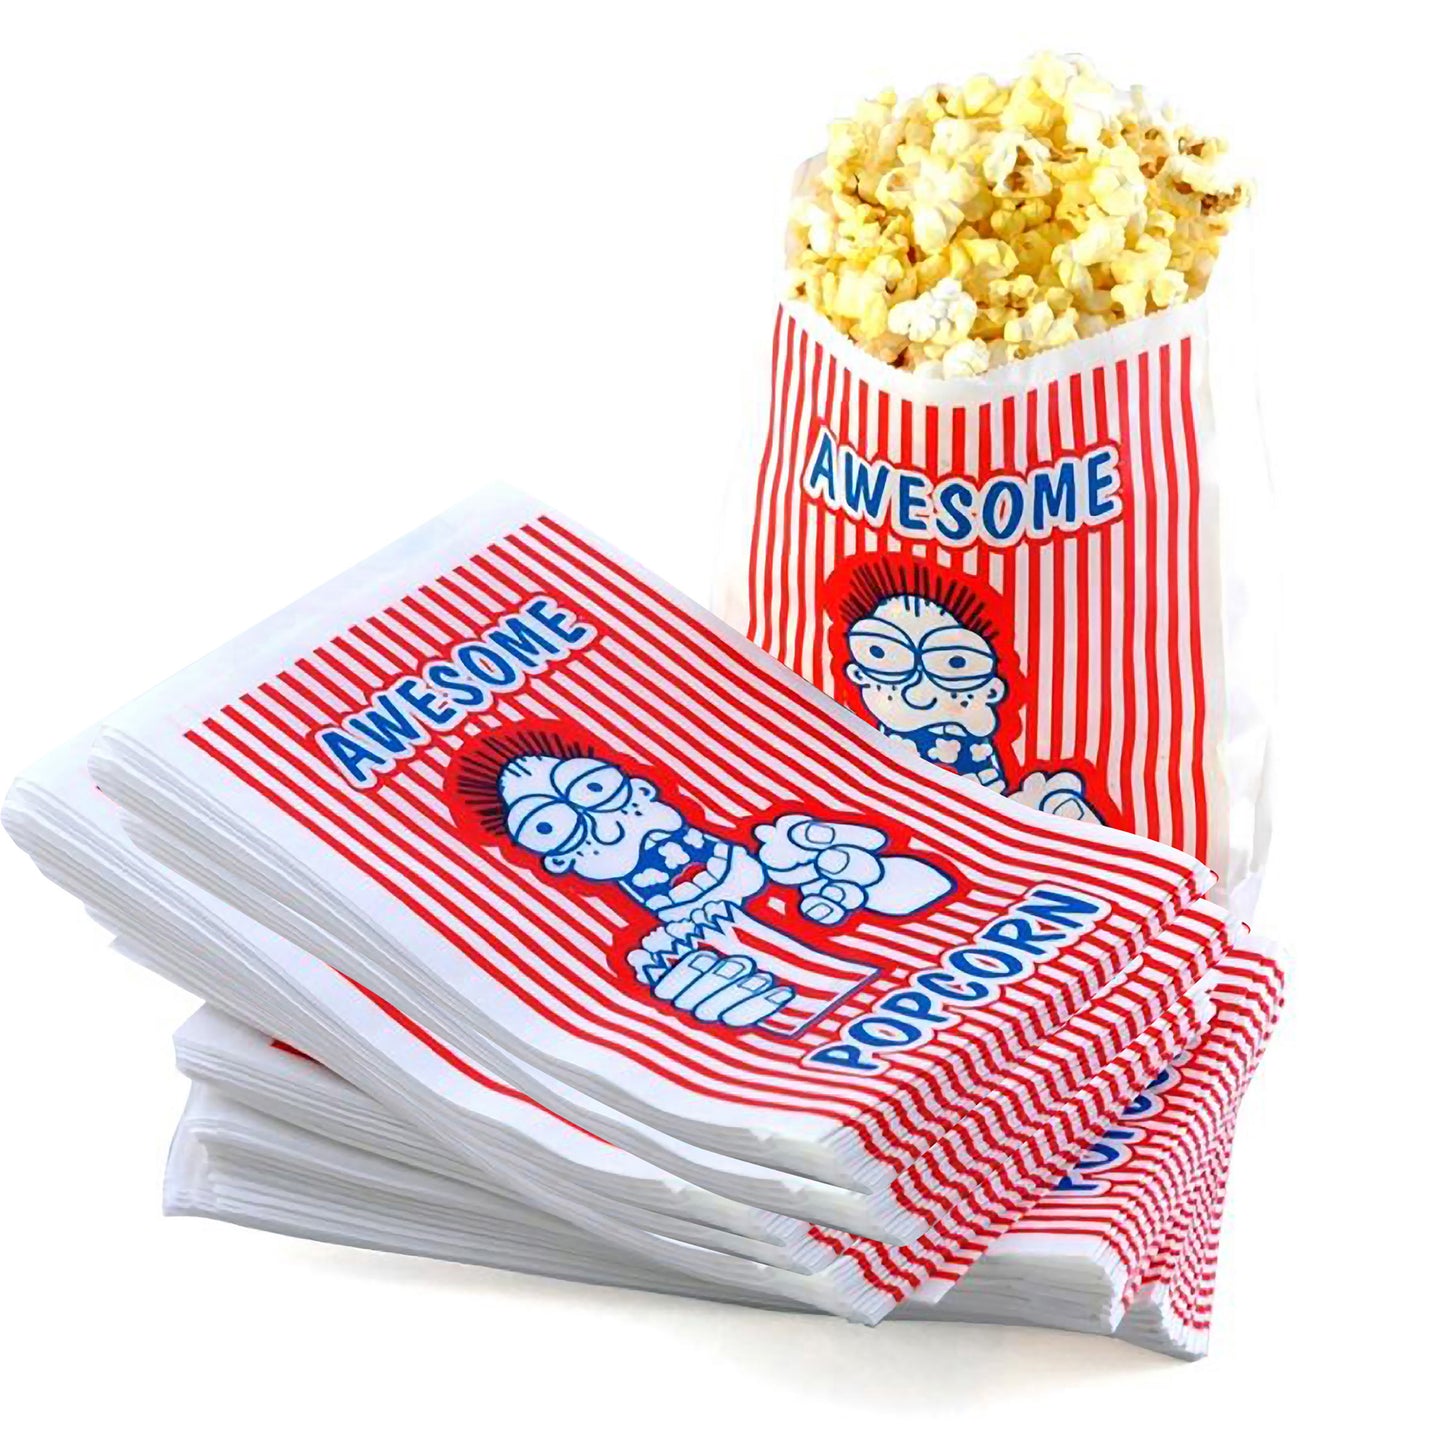 100 Popcorn Bags and 6 Ounce All-in-One Popcorn Packs  – Case of 12